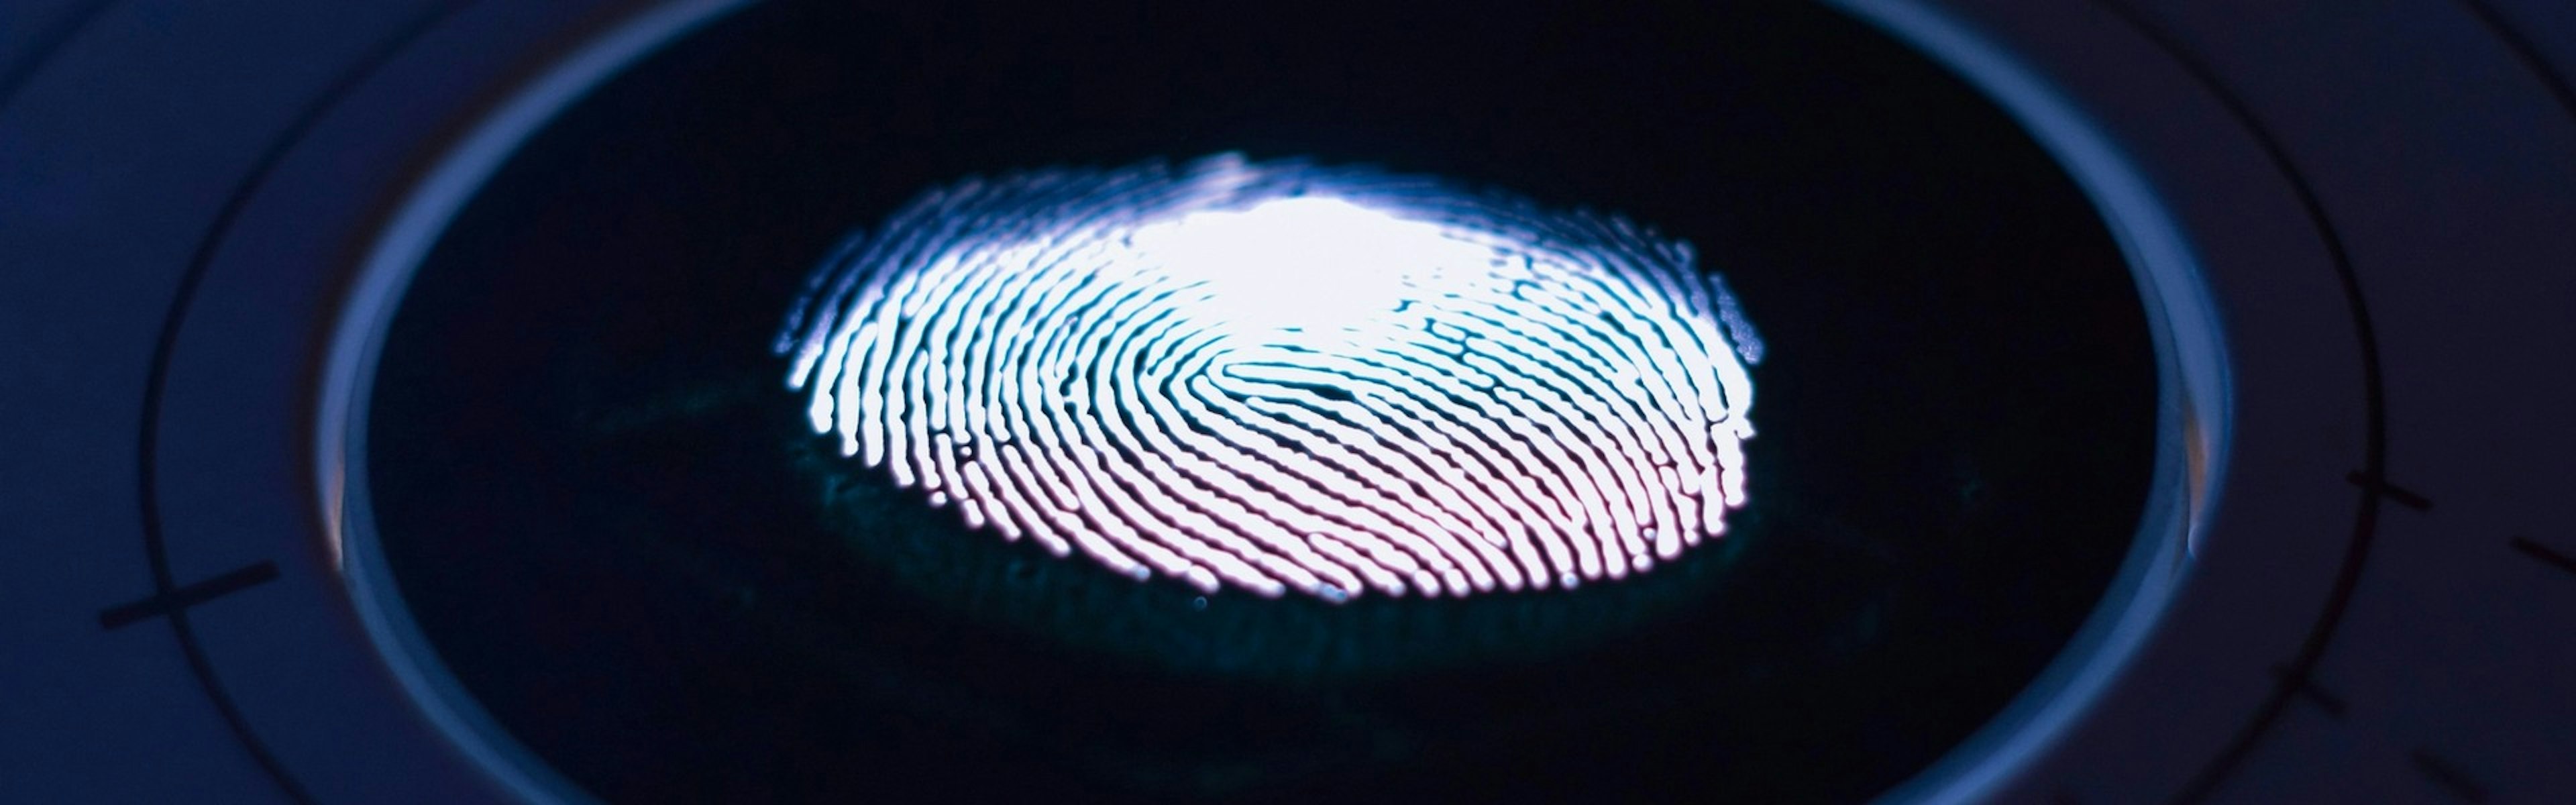 Cover Image for Do Expunged Records Show Up on Fingerprinting?